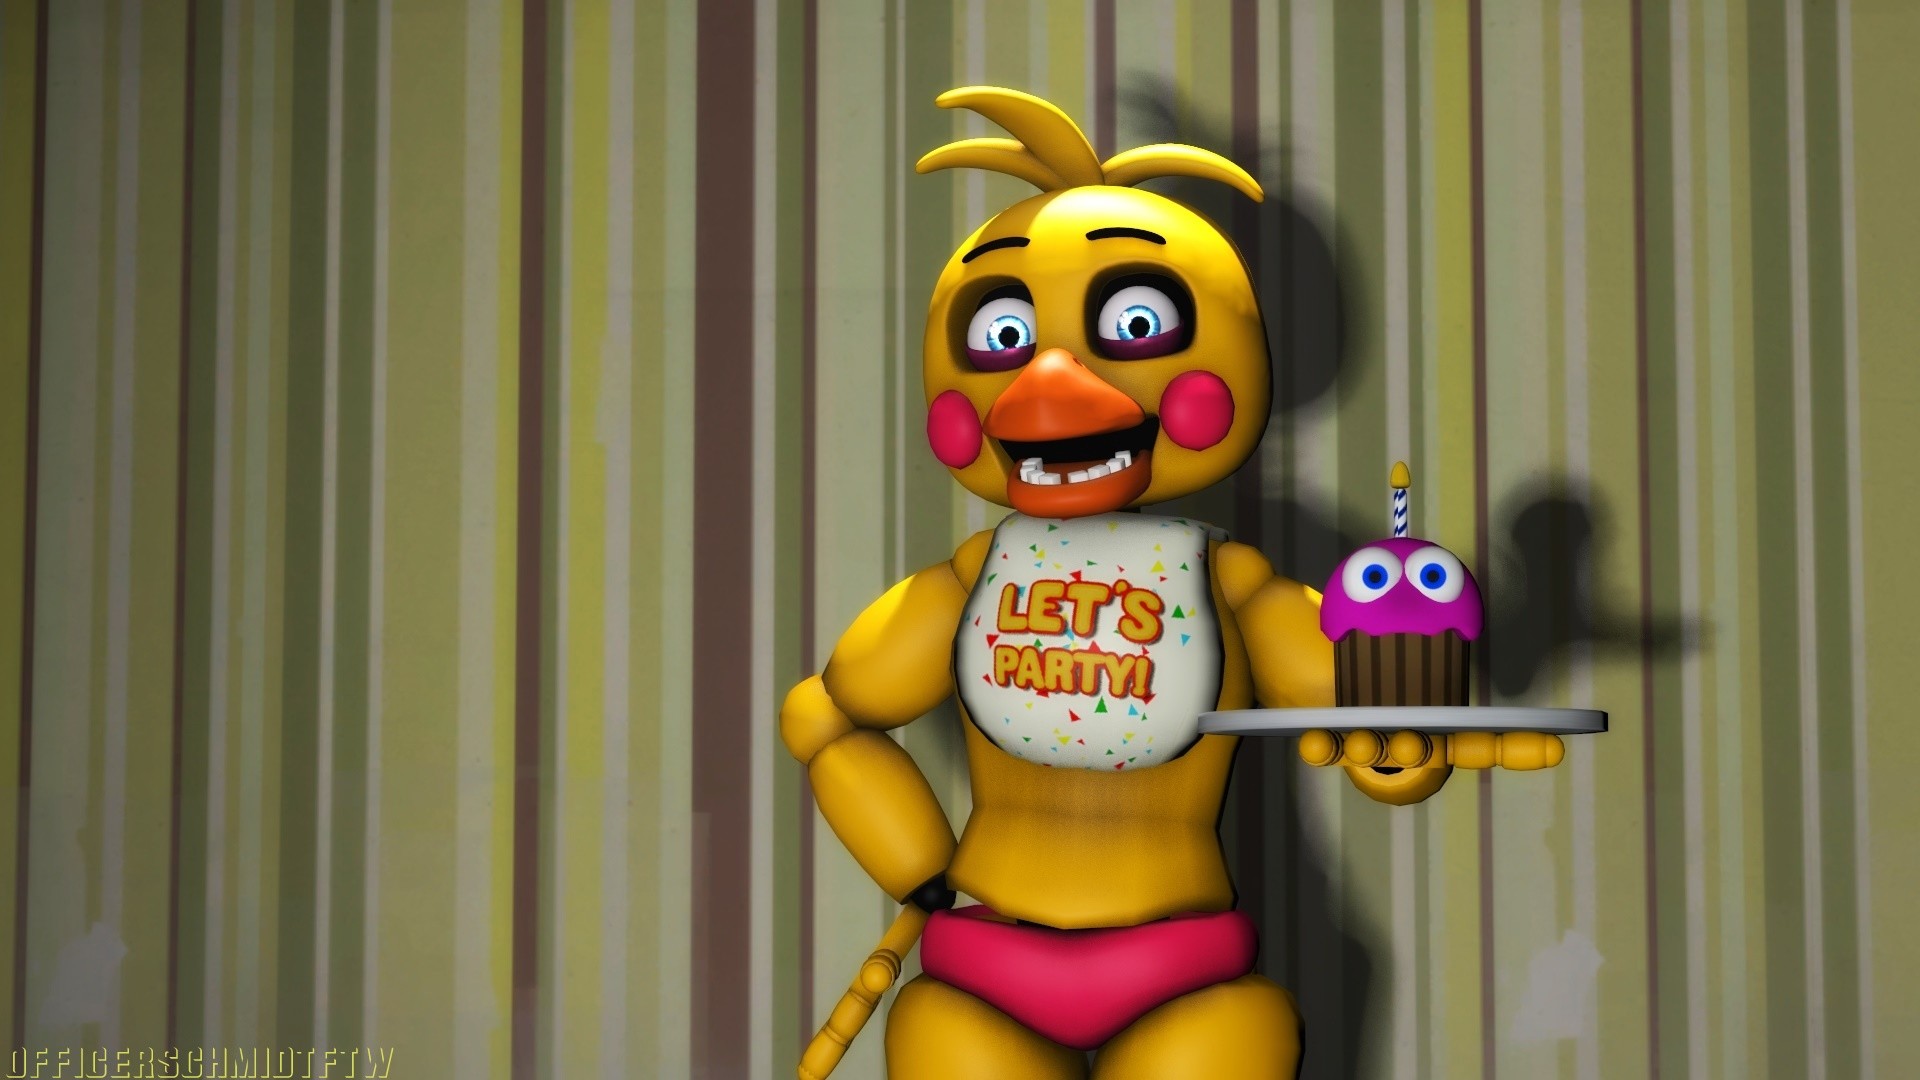 1920x1080 Five Nights at Freddy's images toy chica sfm by officerschmidtftw d9fctes  HD wallpaper and background photos